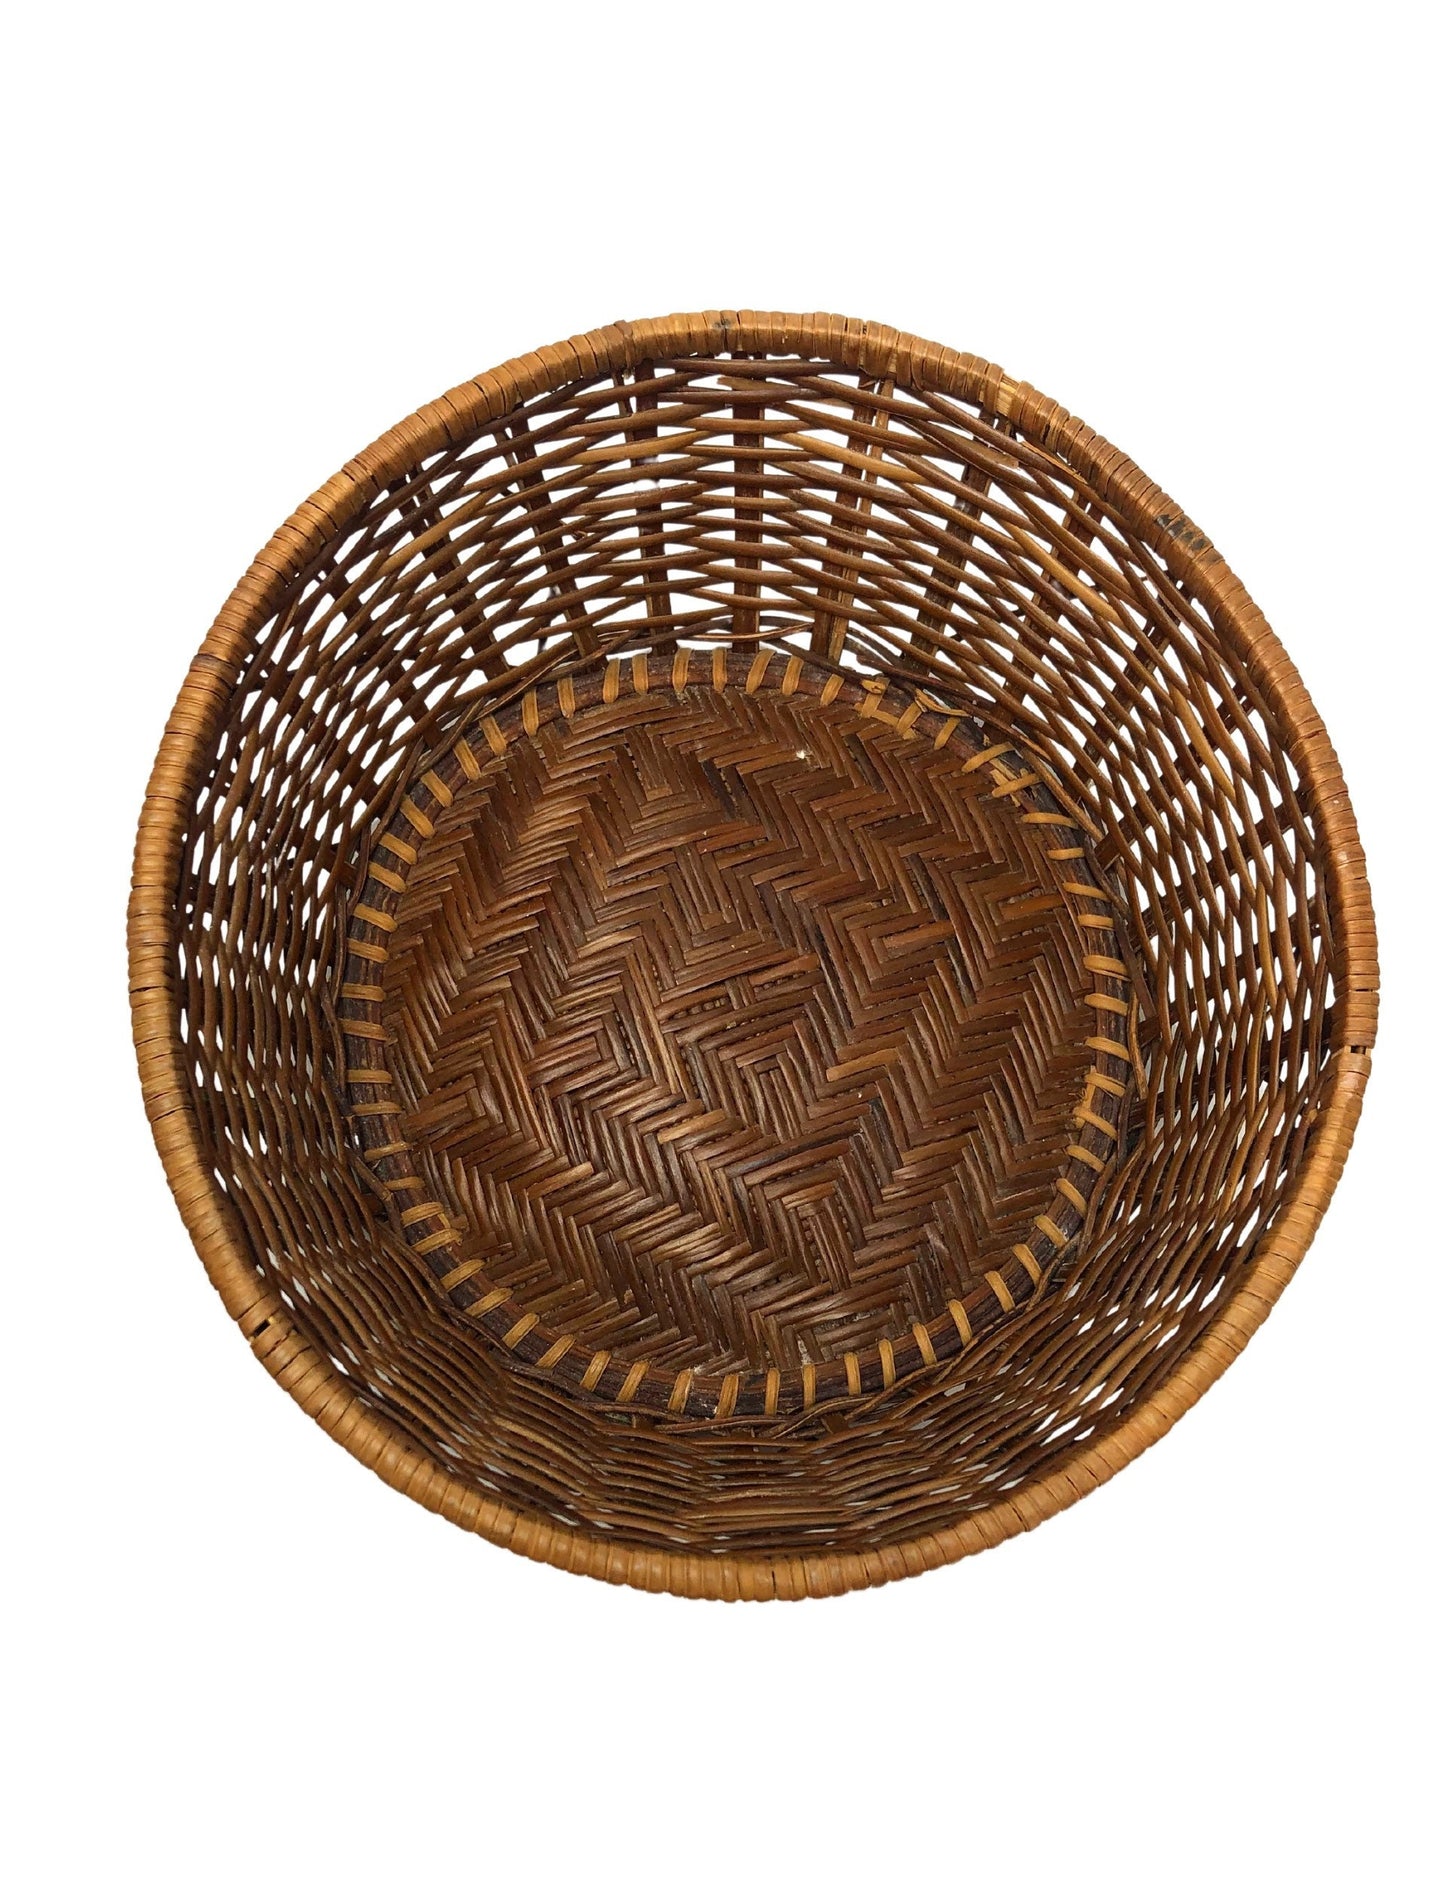 Vintage 80’s Woven Wall Catchall Basket 9” W x 9” H x 3” D